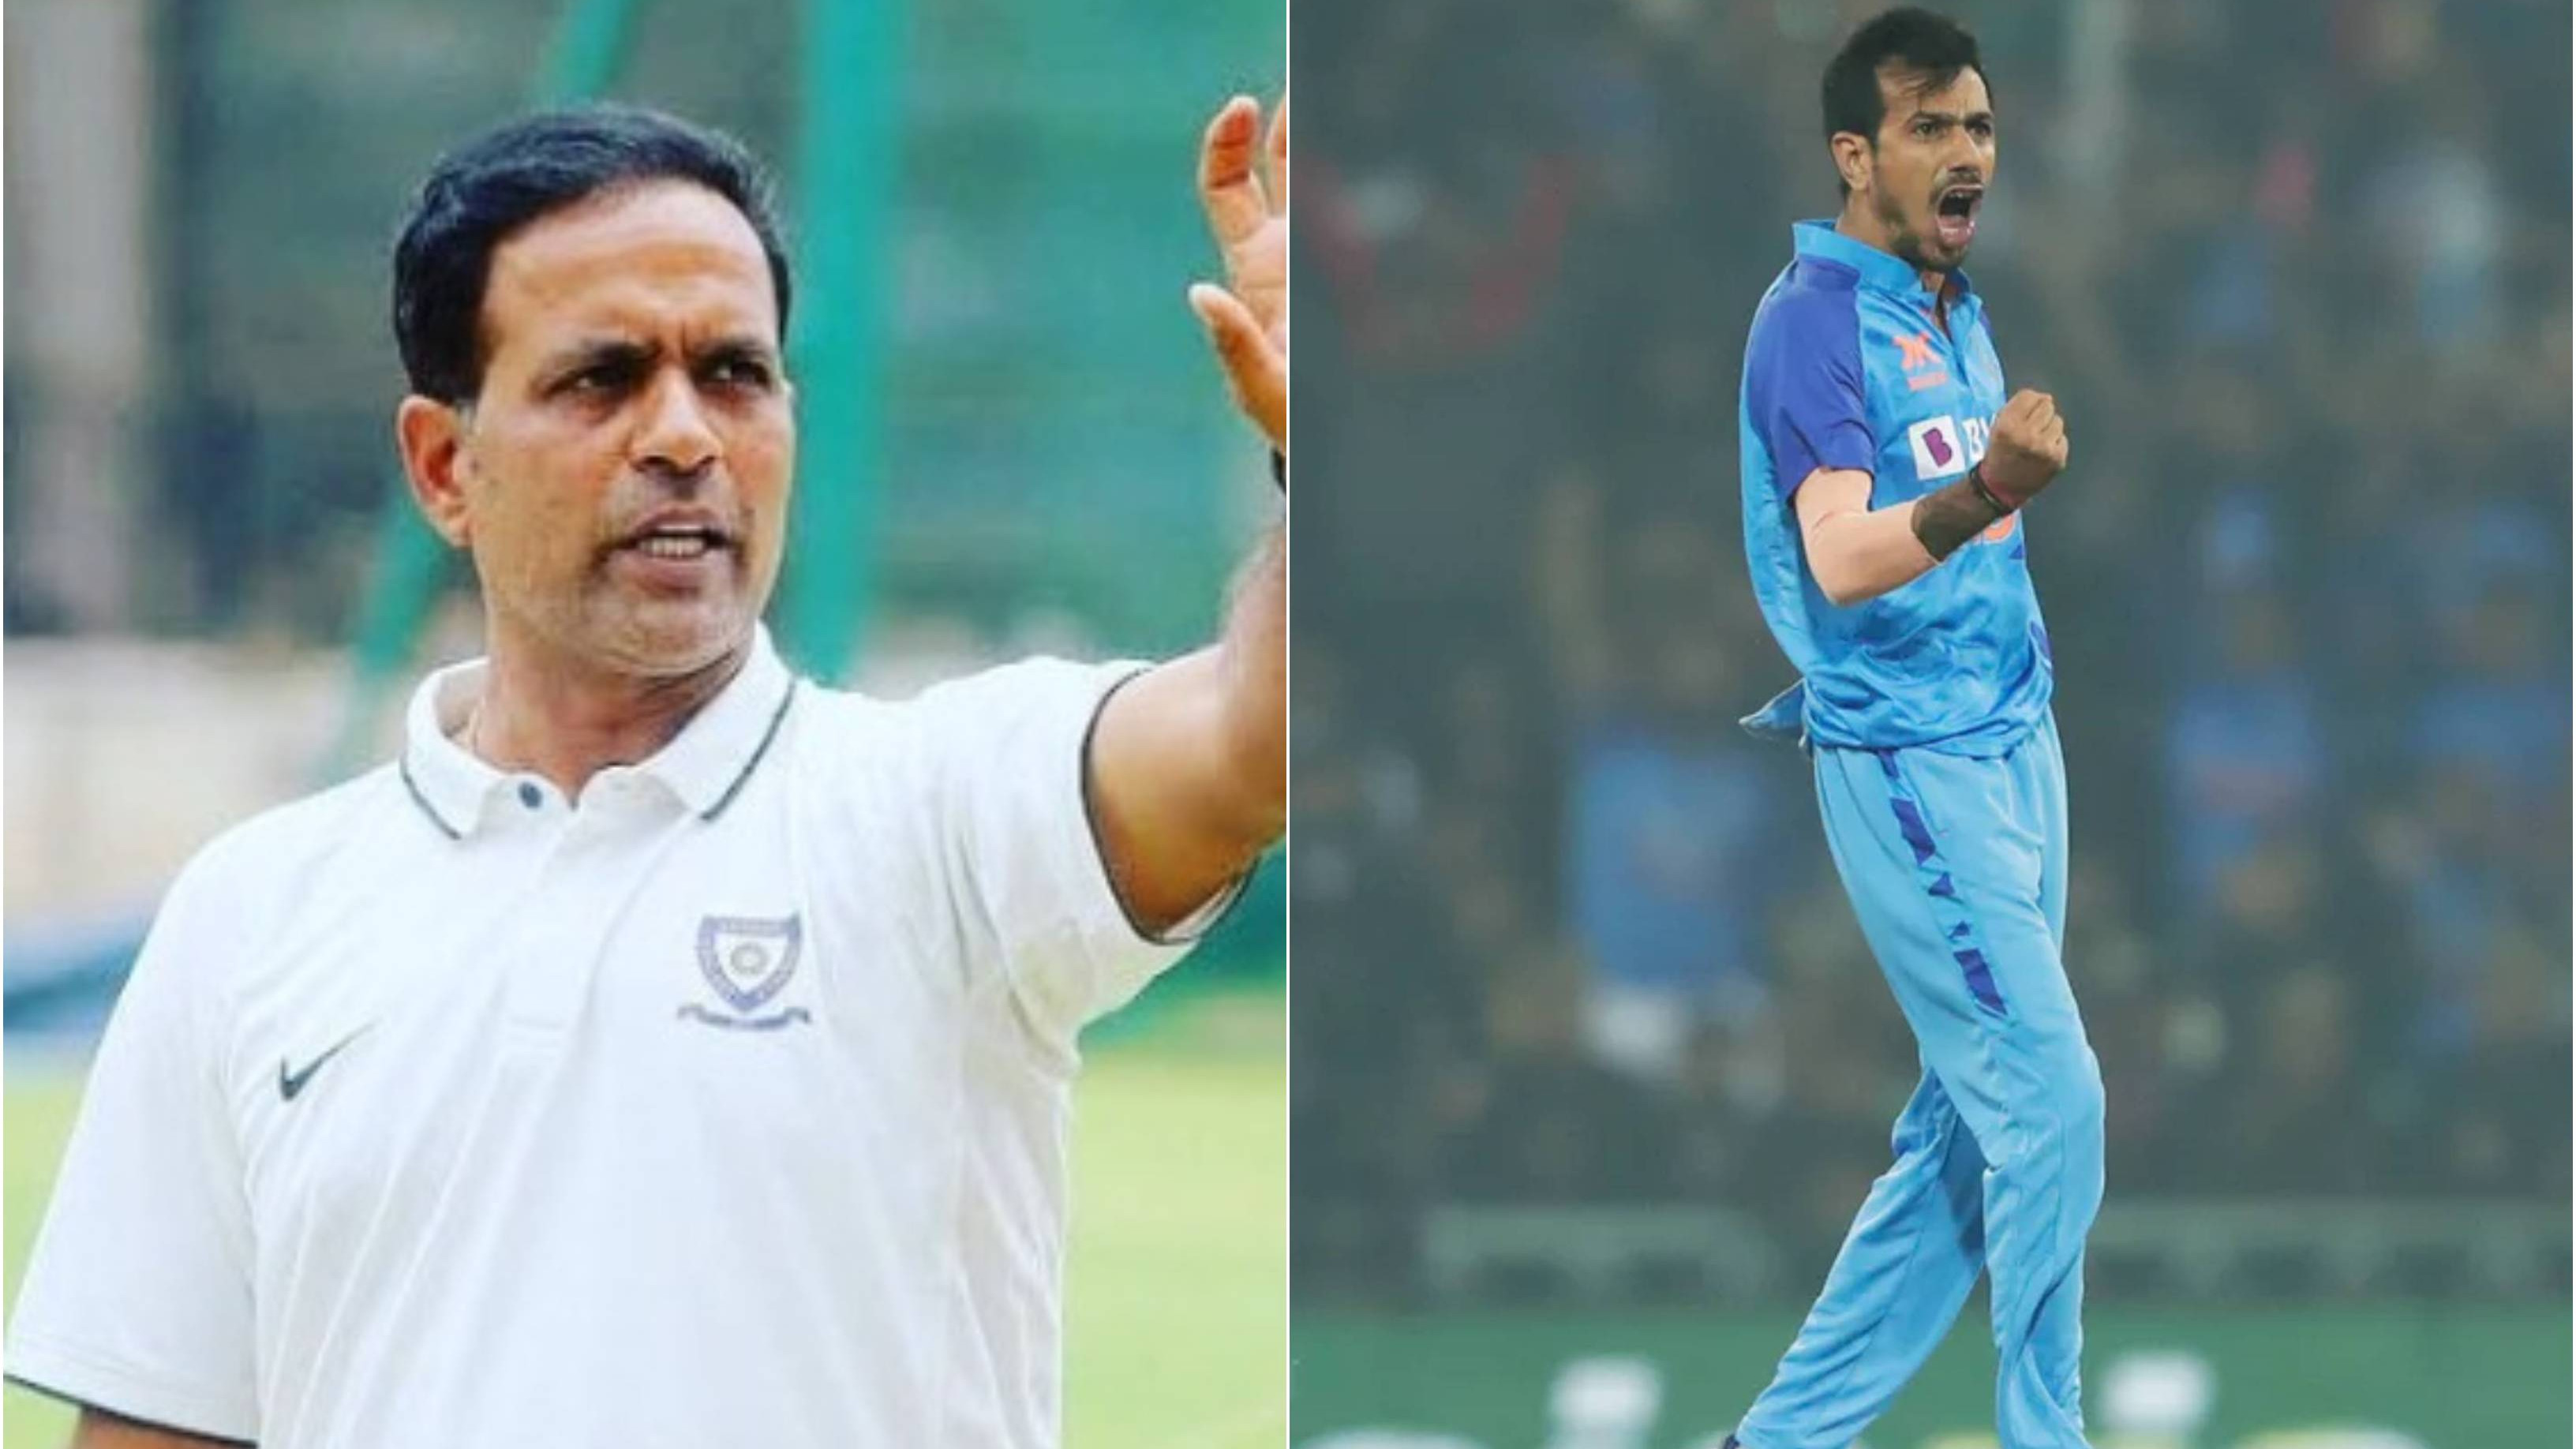 “Needs to focus more on his follow-through…”: Sunil Joshi advises struggling Chahal to play domestic cricket